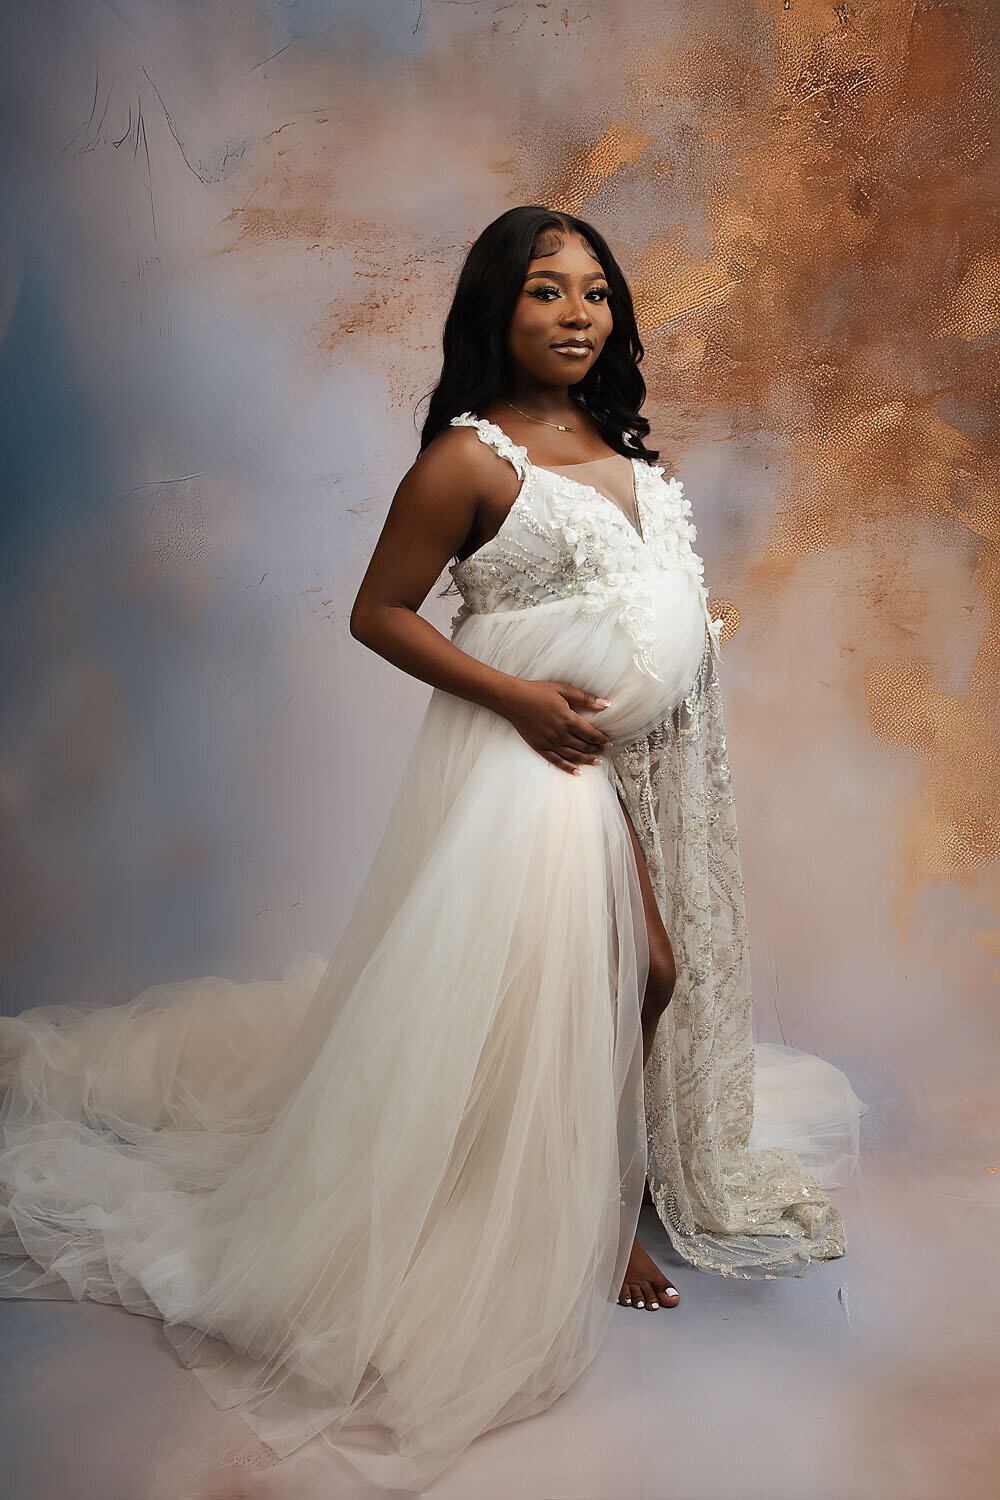 A mom to be stands in a photography studio holding her bump in a long white maternity gown